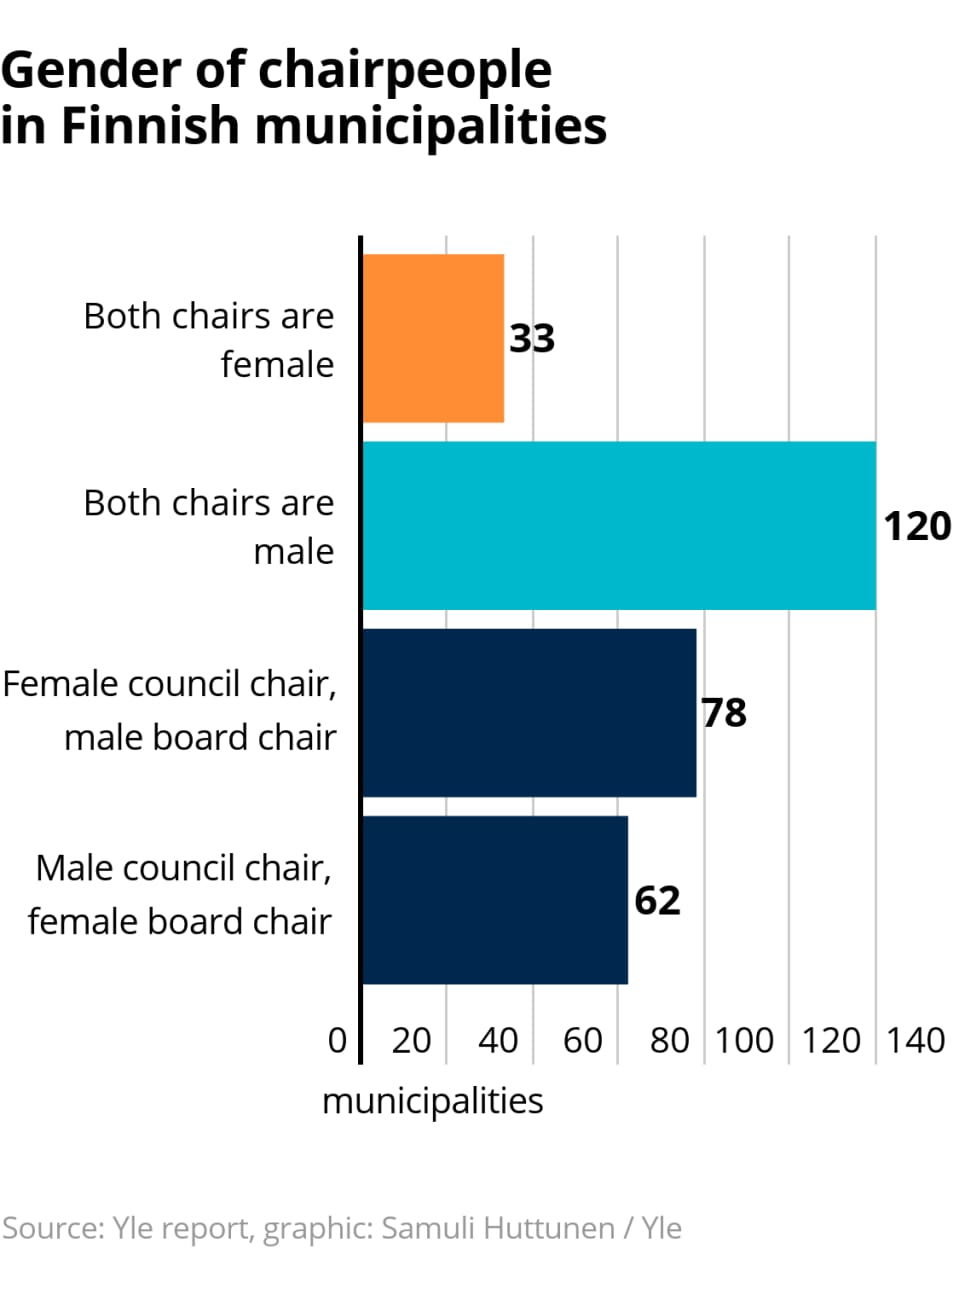 Yle survey: Only a third of municipal leaders are women